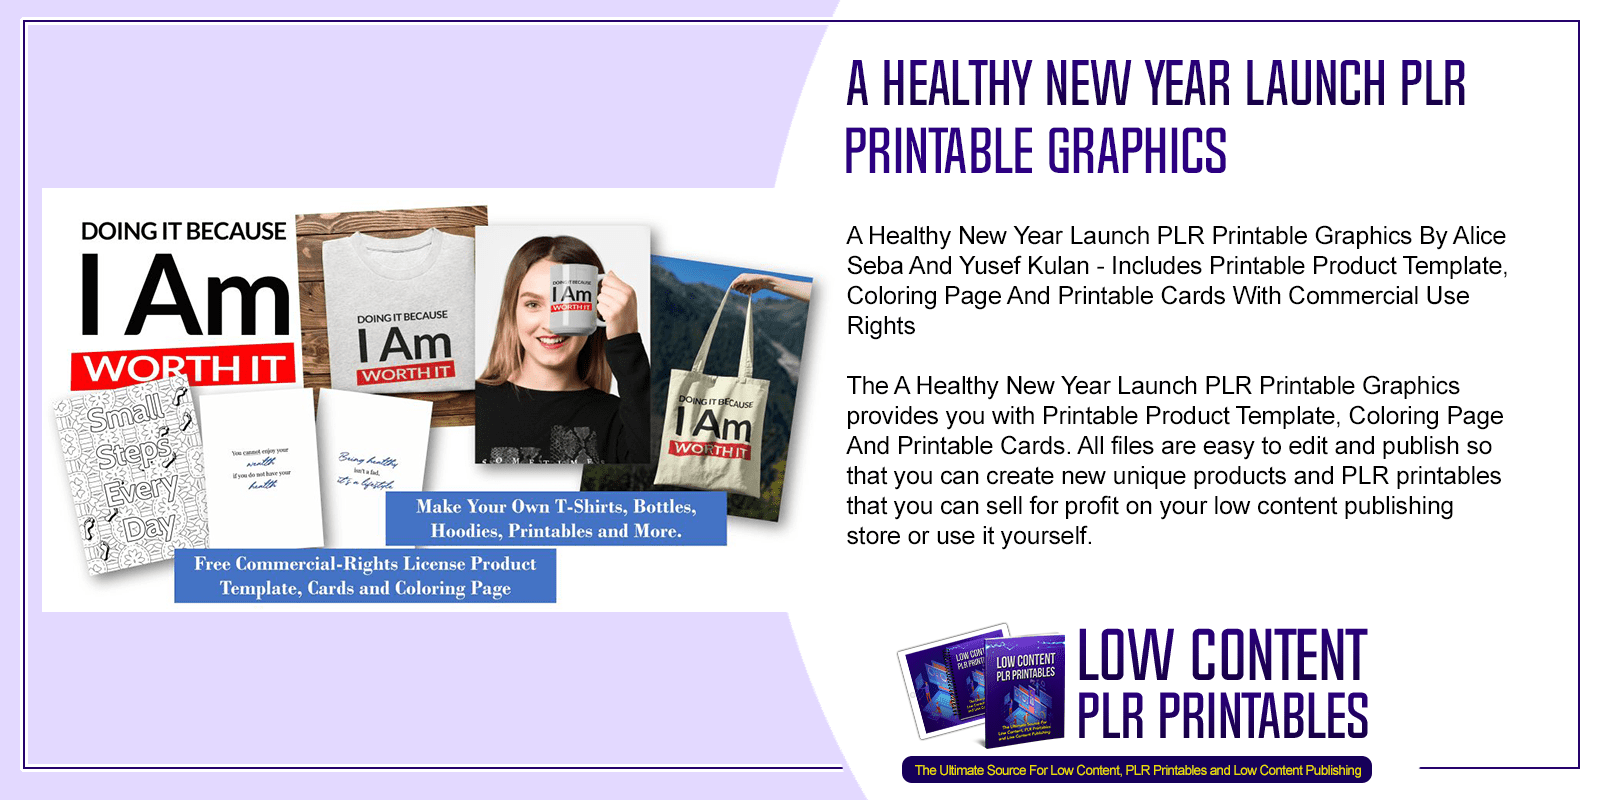 A Healthy New Year Launch PLR Printable Graphics